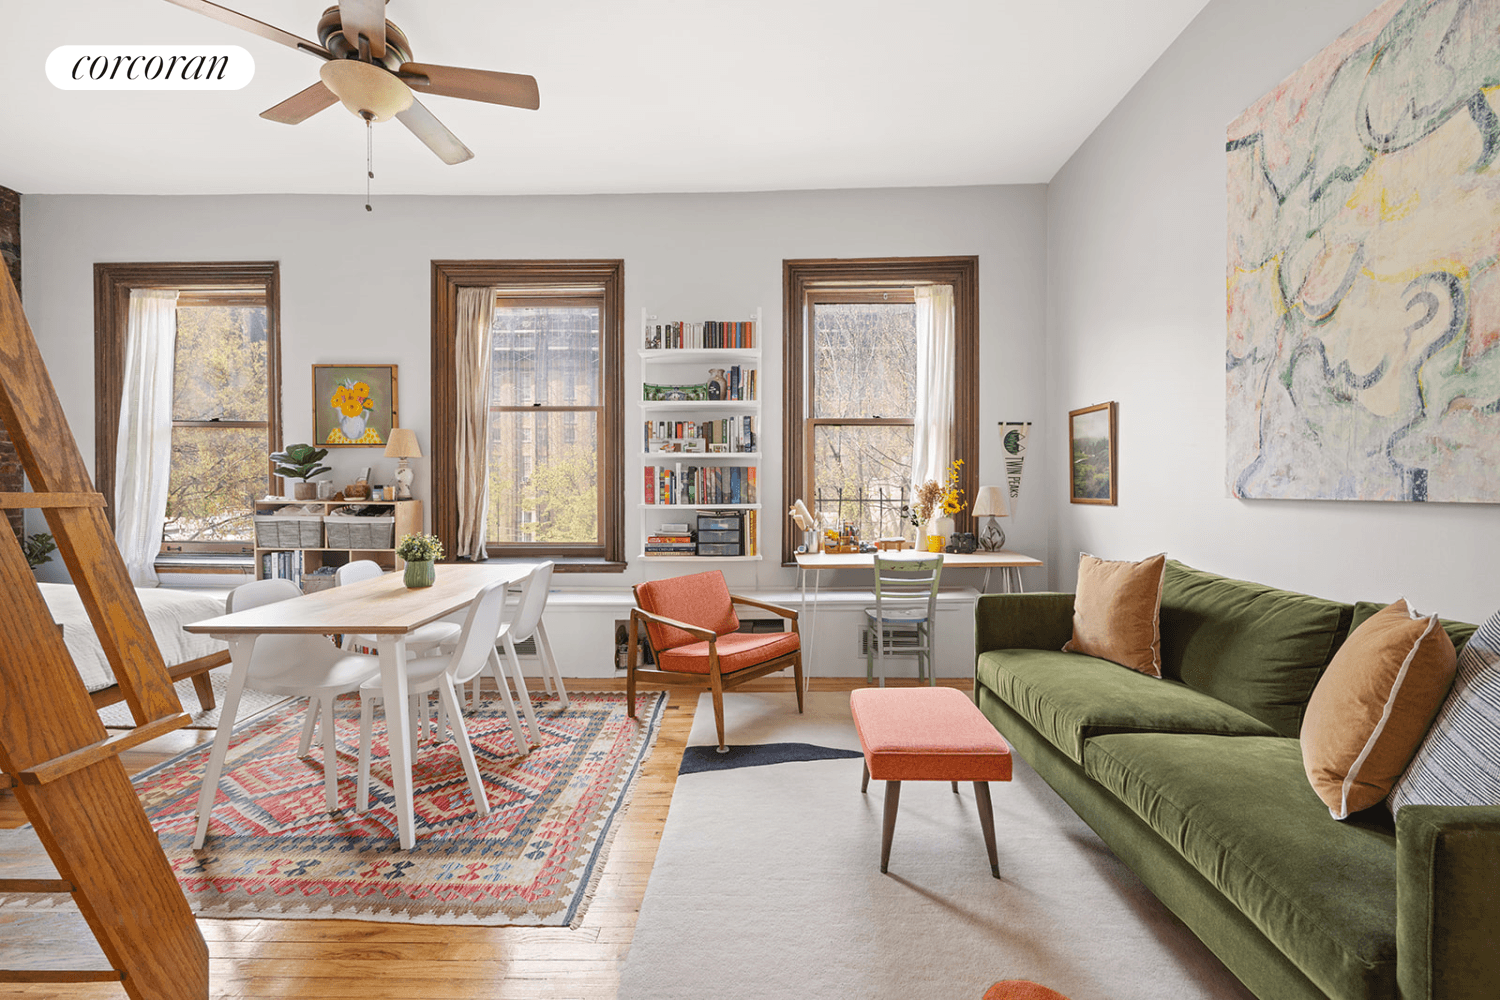 In the heart of Fort Greene, just one door away from Fort Greene Park and nestled on one of Brooklyn's most coveted and picturesque streets, discover a charming top floor ...